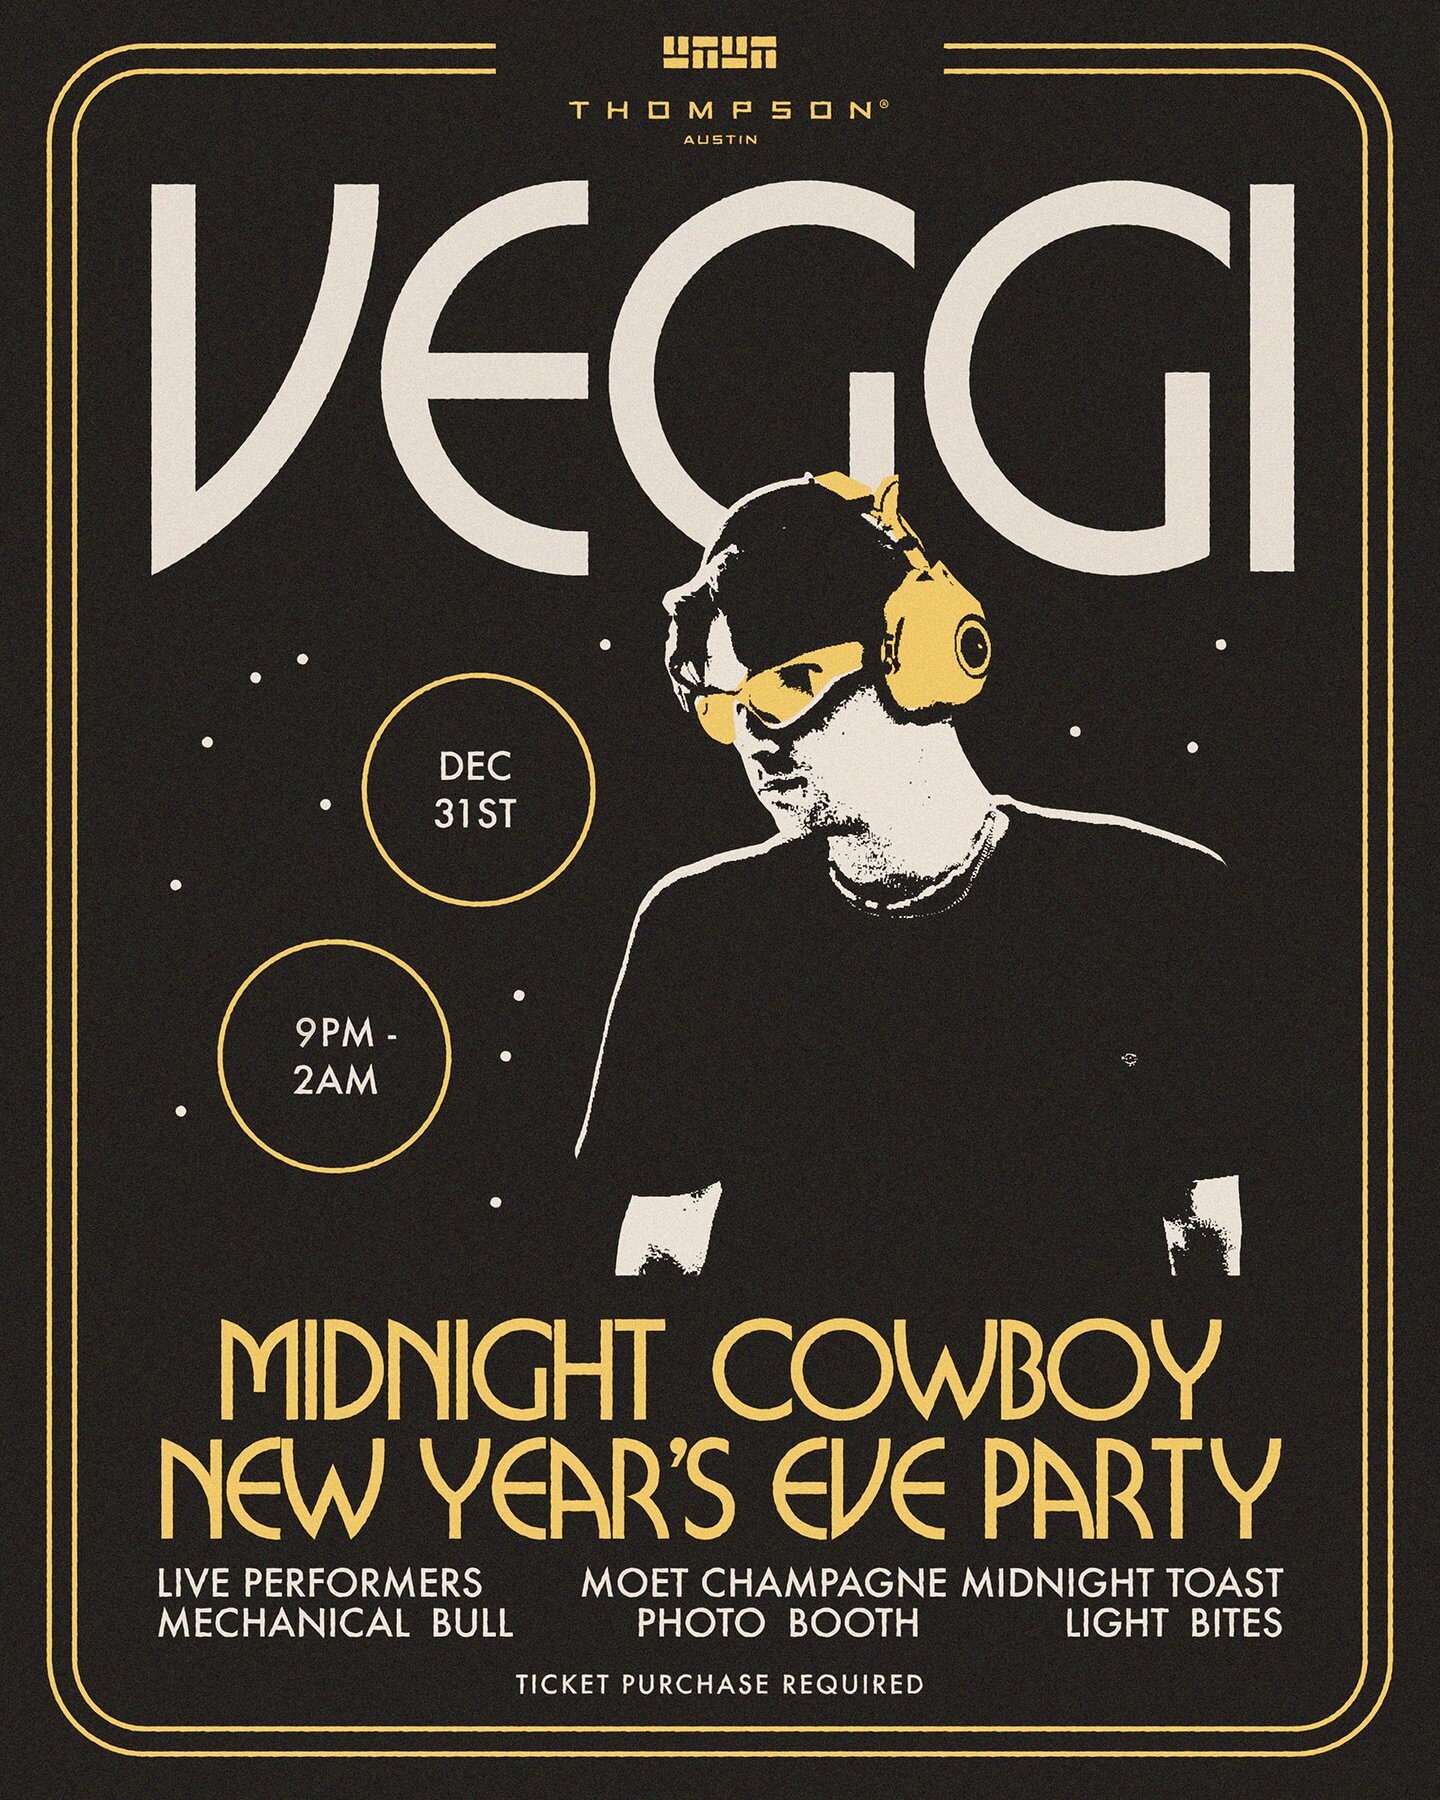 📍 Austin

#nye @waxmyrtles w/ @veggibeats is going to be 🔥 

Early set by @djnayyz &amp; more surprises in store!